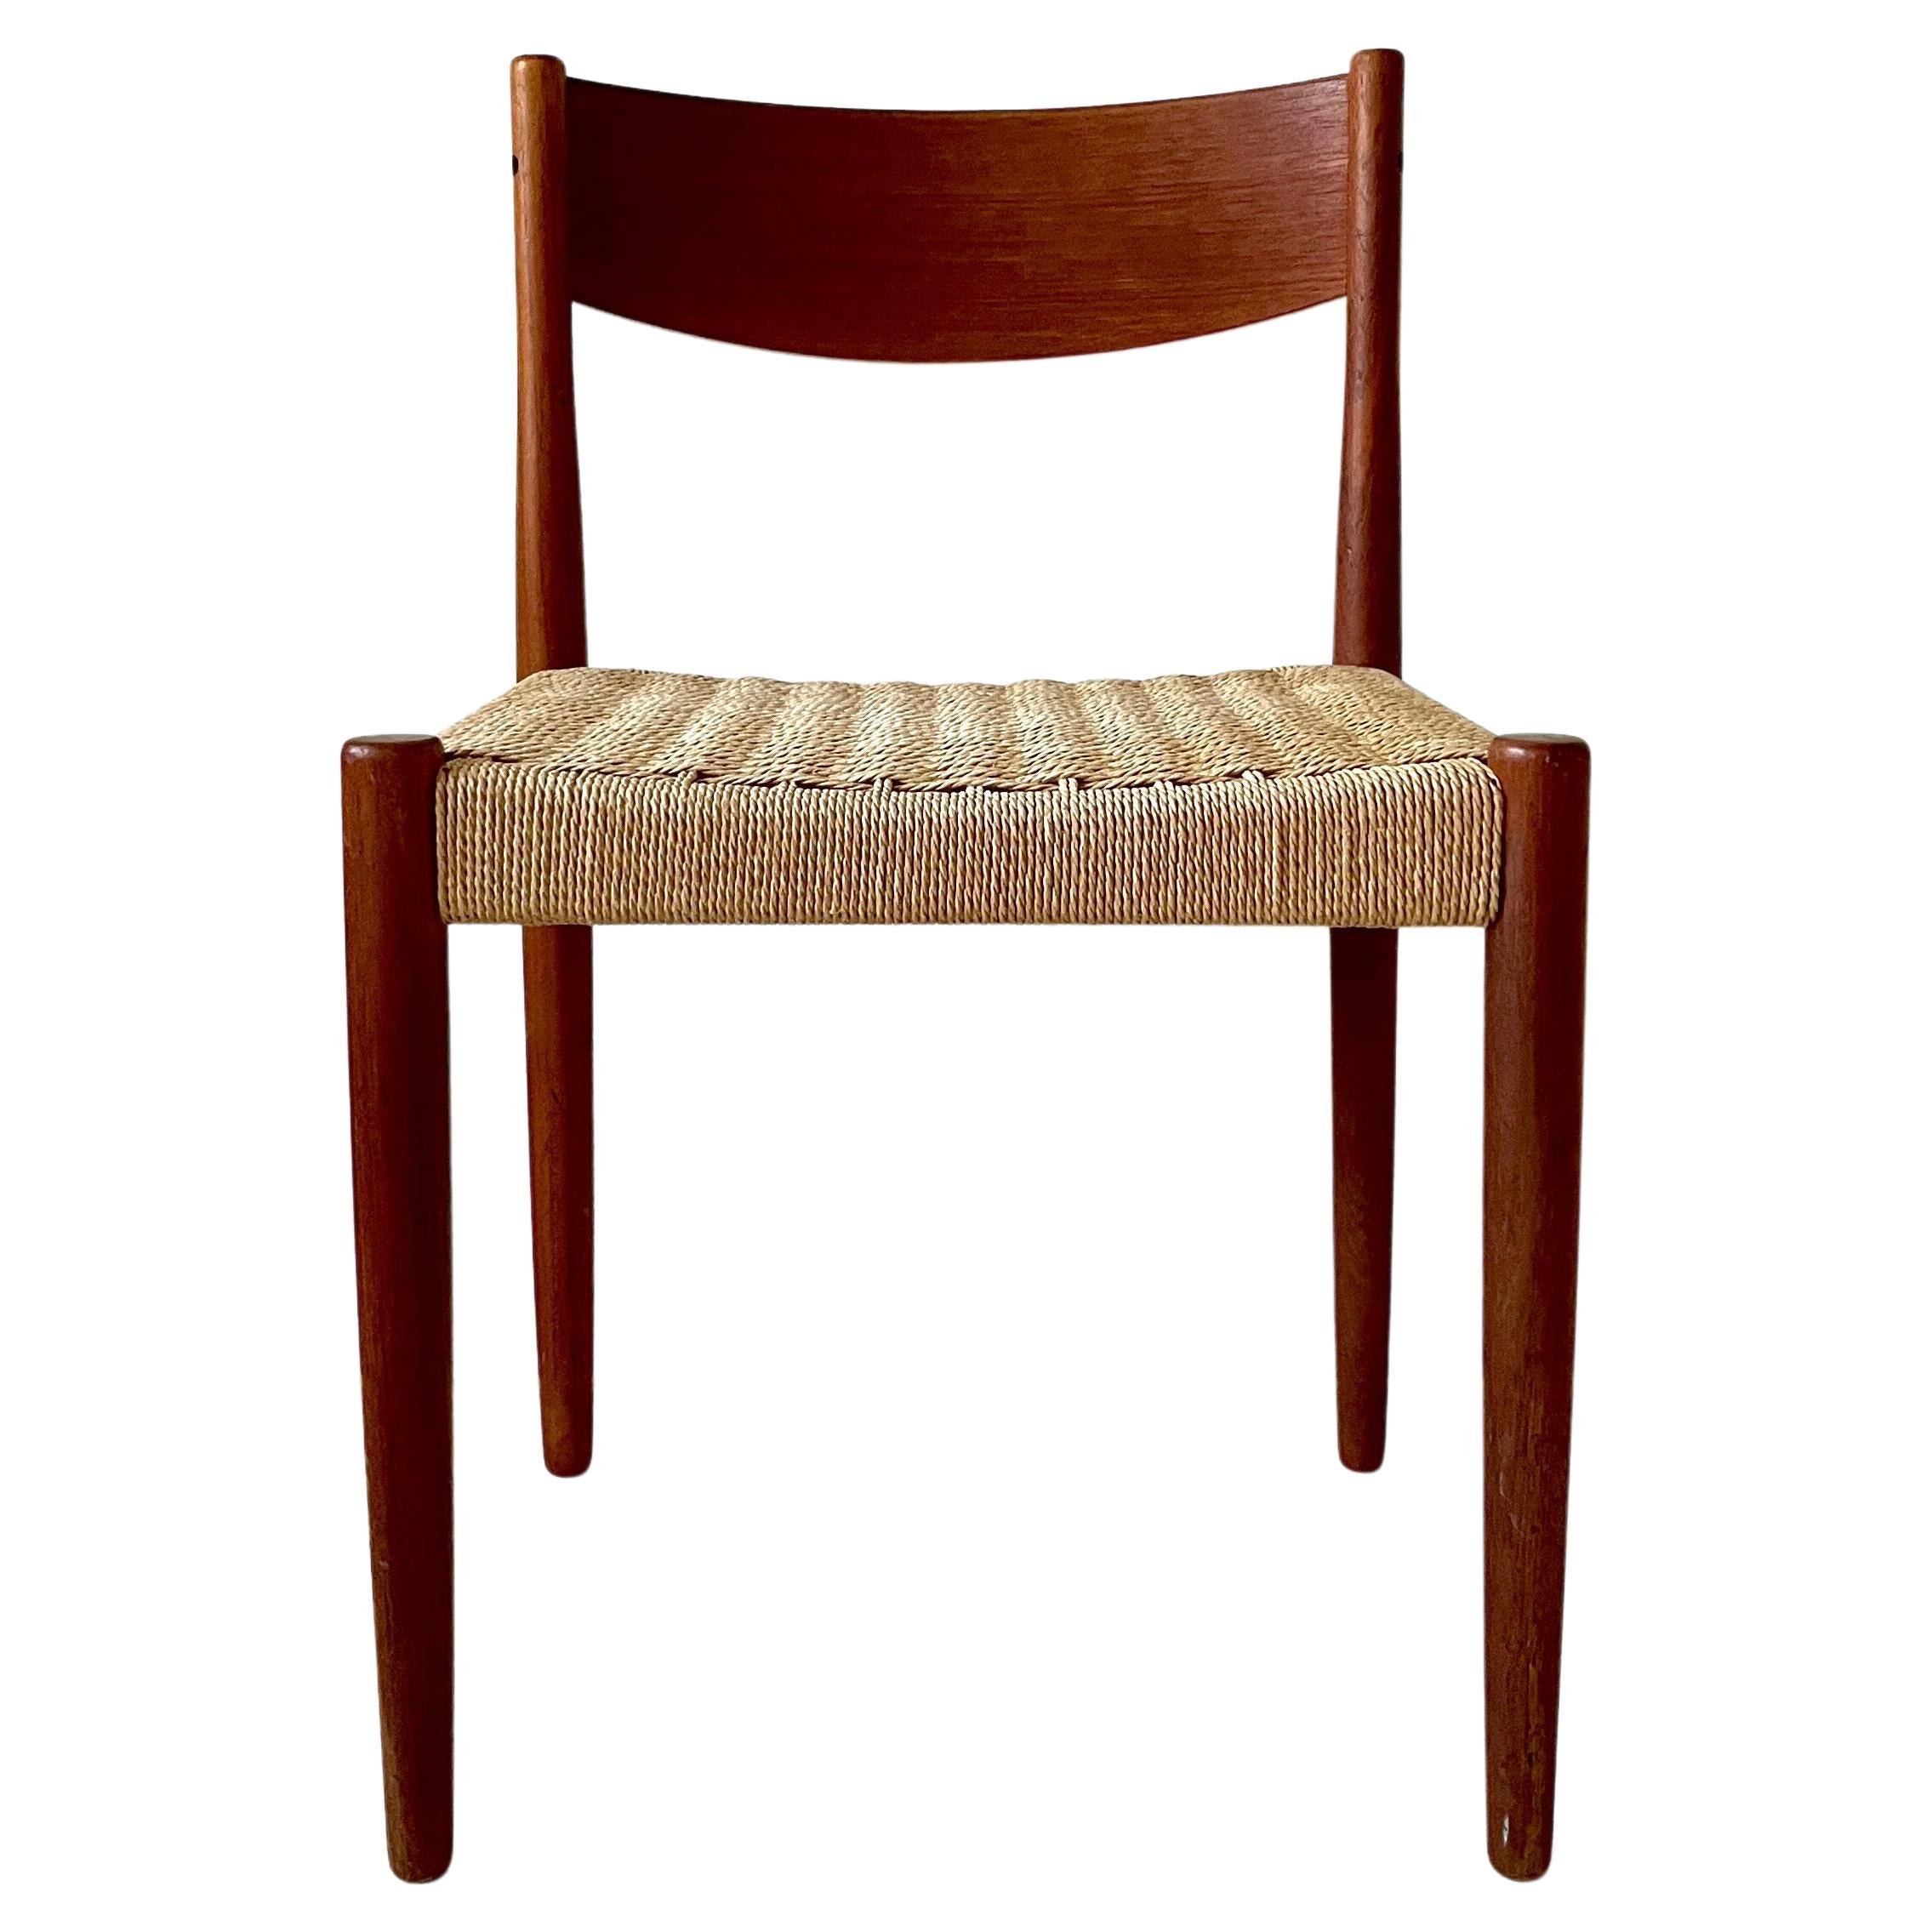 Teak Danish Modern Dining Chair by Poul Volther for Frem Røjle  For Sale